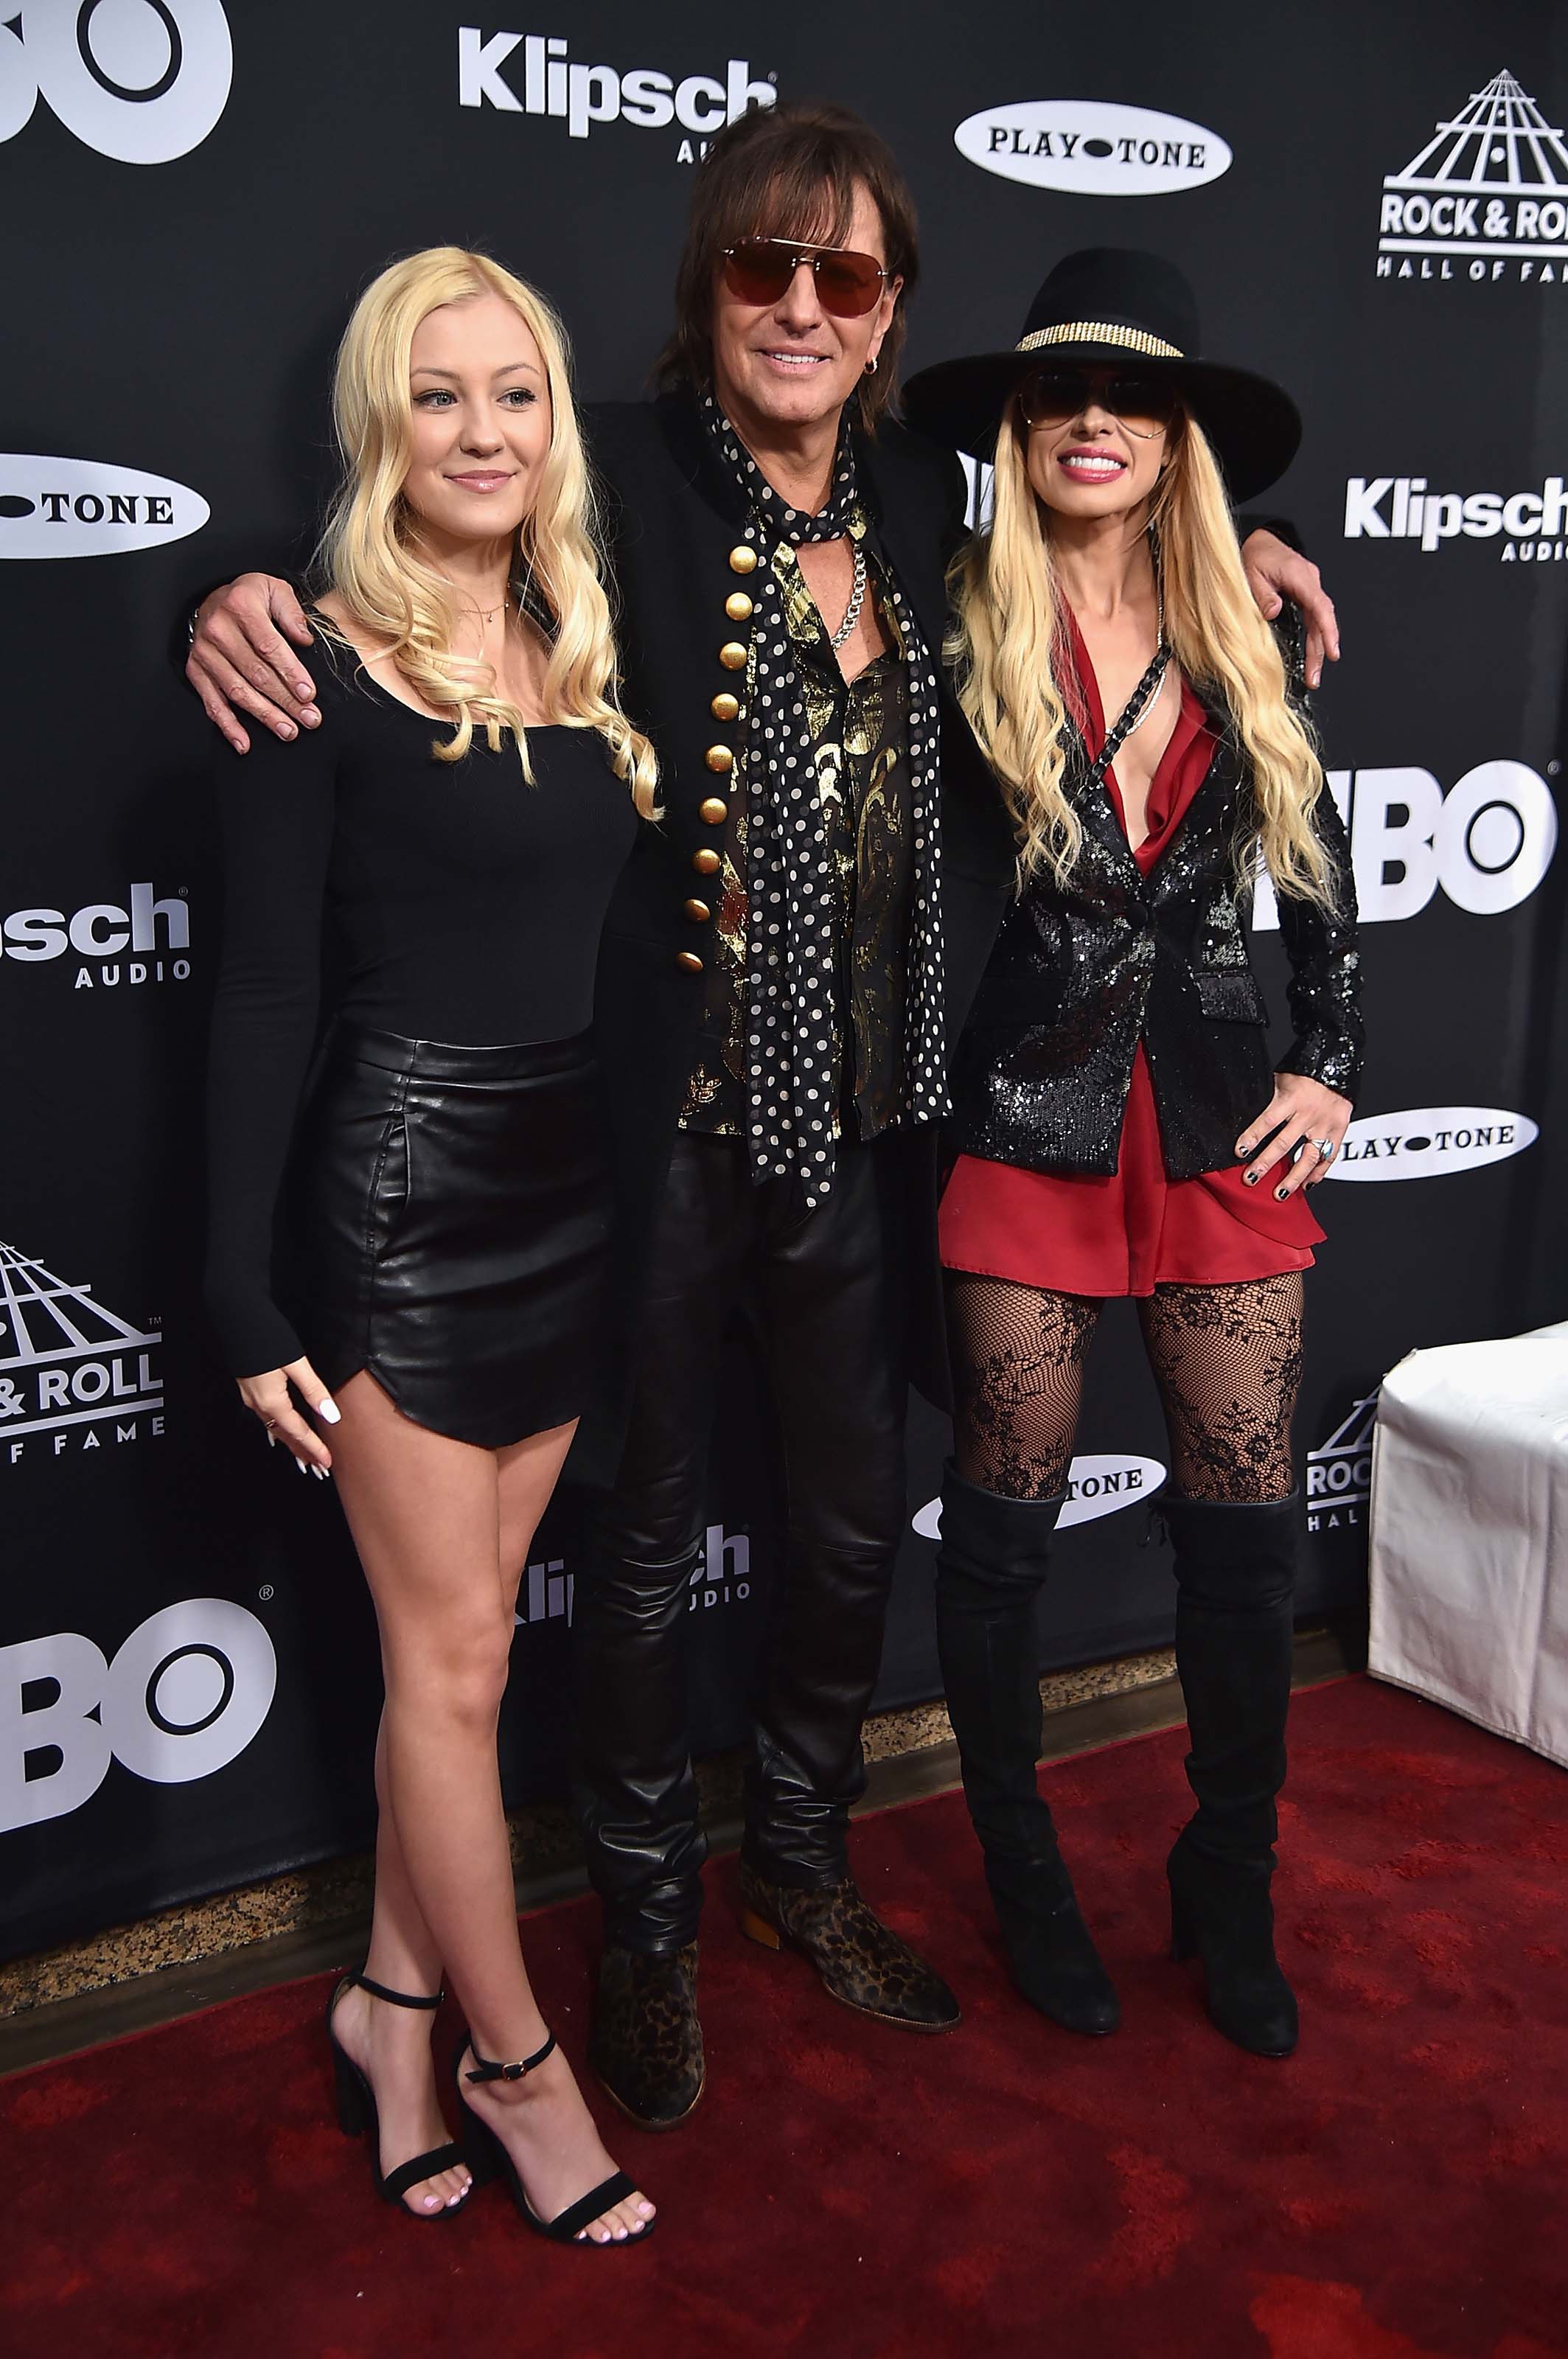 Ava Sambora attends 33rd Annual Rock & Roll Hall of Fame Induction Ceremony